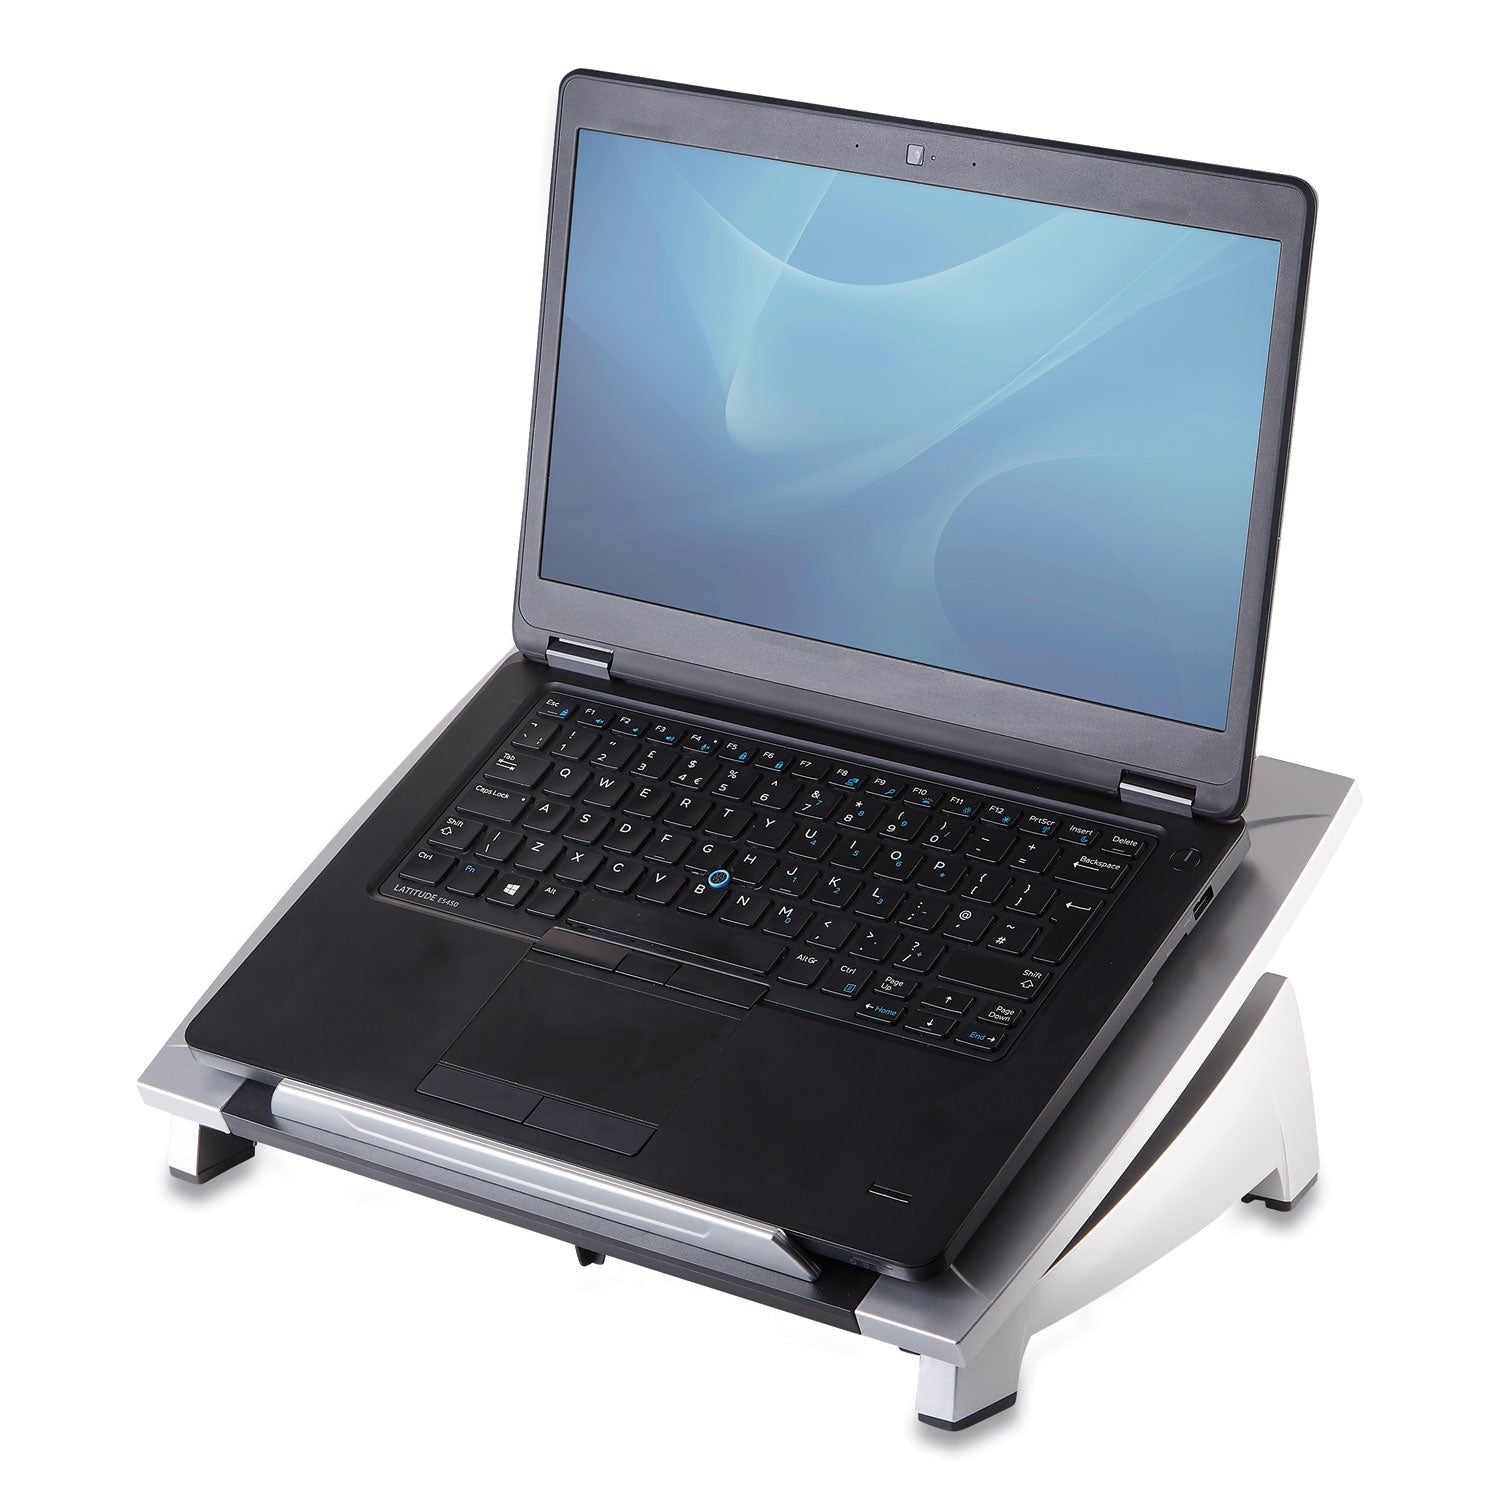 Office Suites Laptop Riser, 15.13" x 11.38" x 4.5" to 6.5", Black/Silver, Supports 10 lbs - 